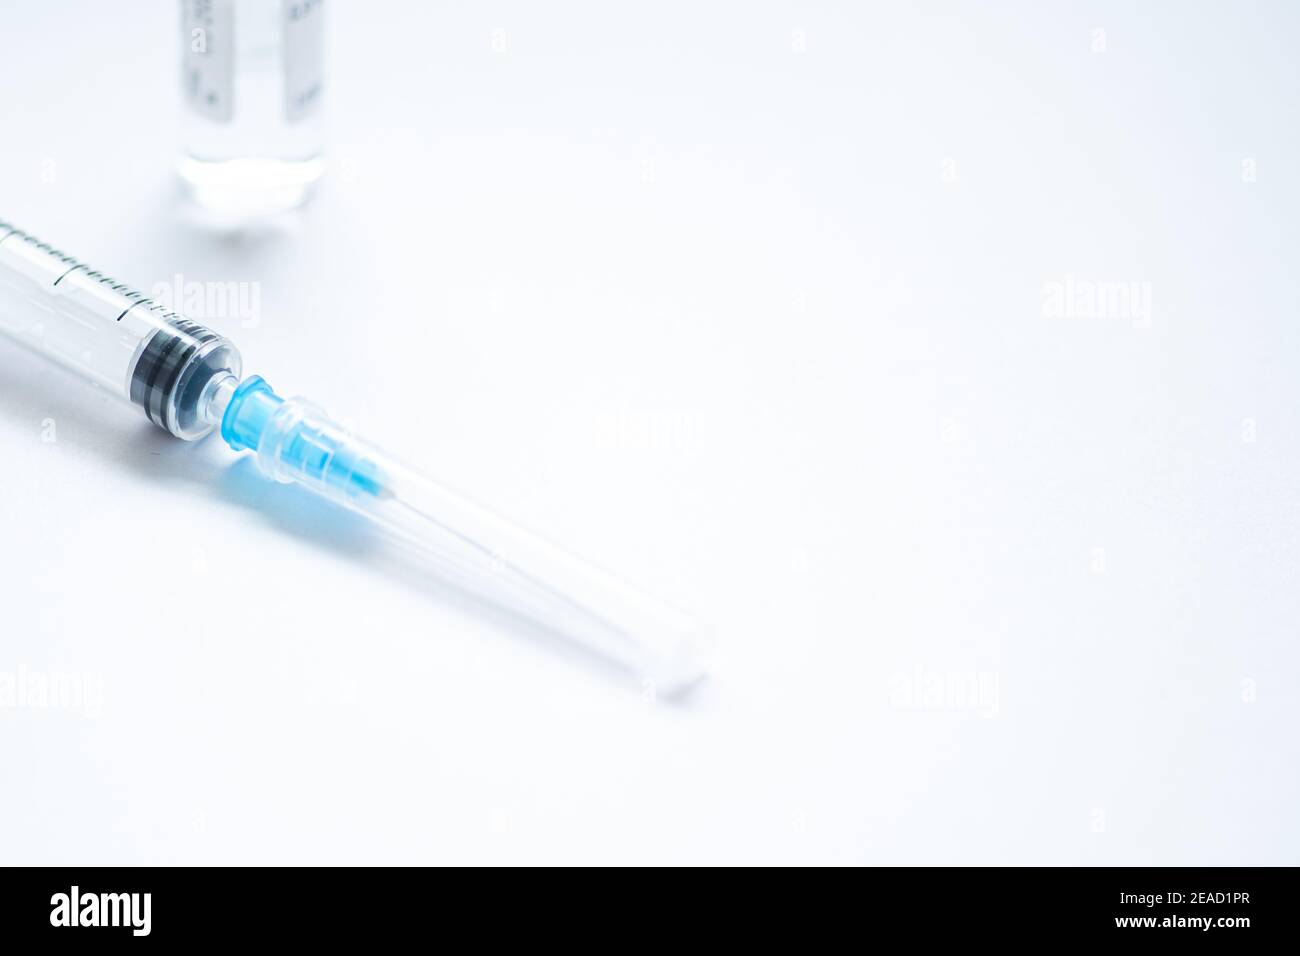 Syringe with needle and cover or top, vial or phial on a white empty space background ready to be used. Covid or Coronavirus vaccine or monoclonal Stock Photo